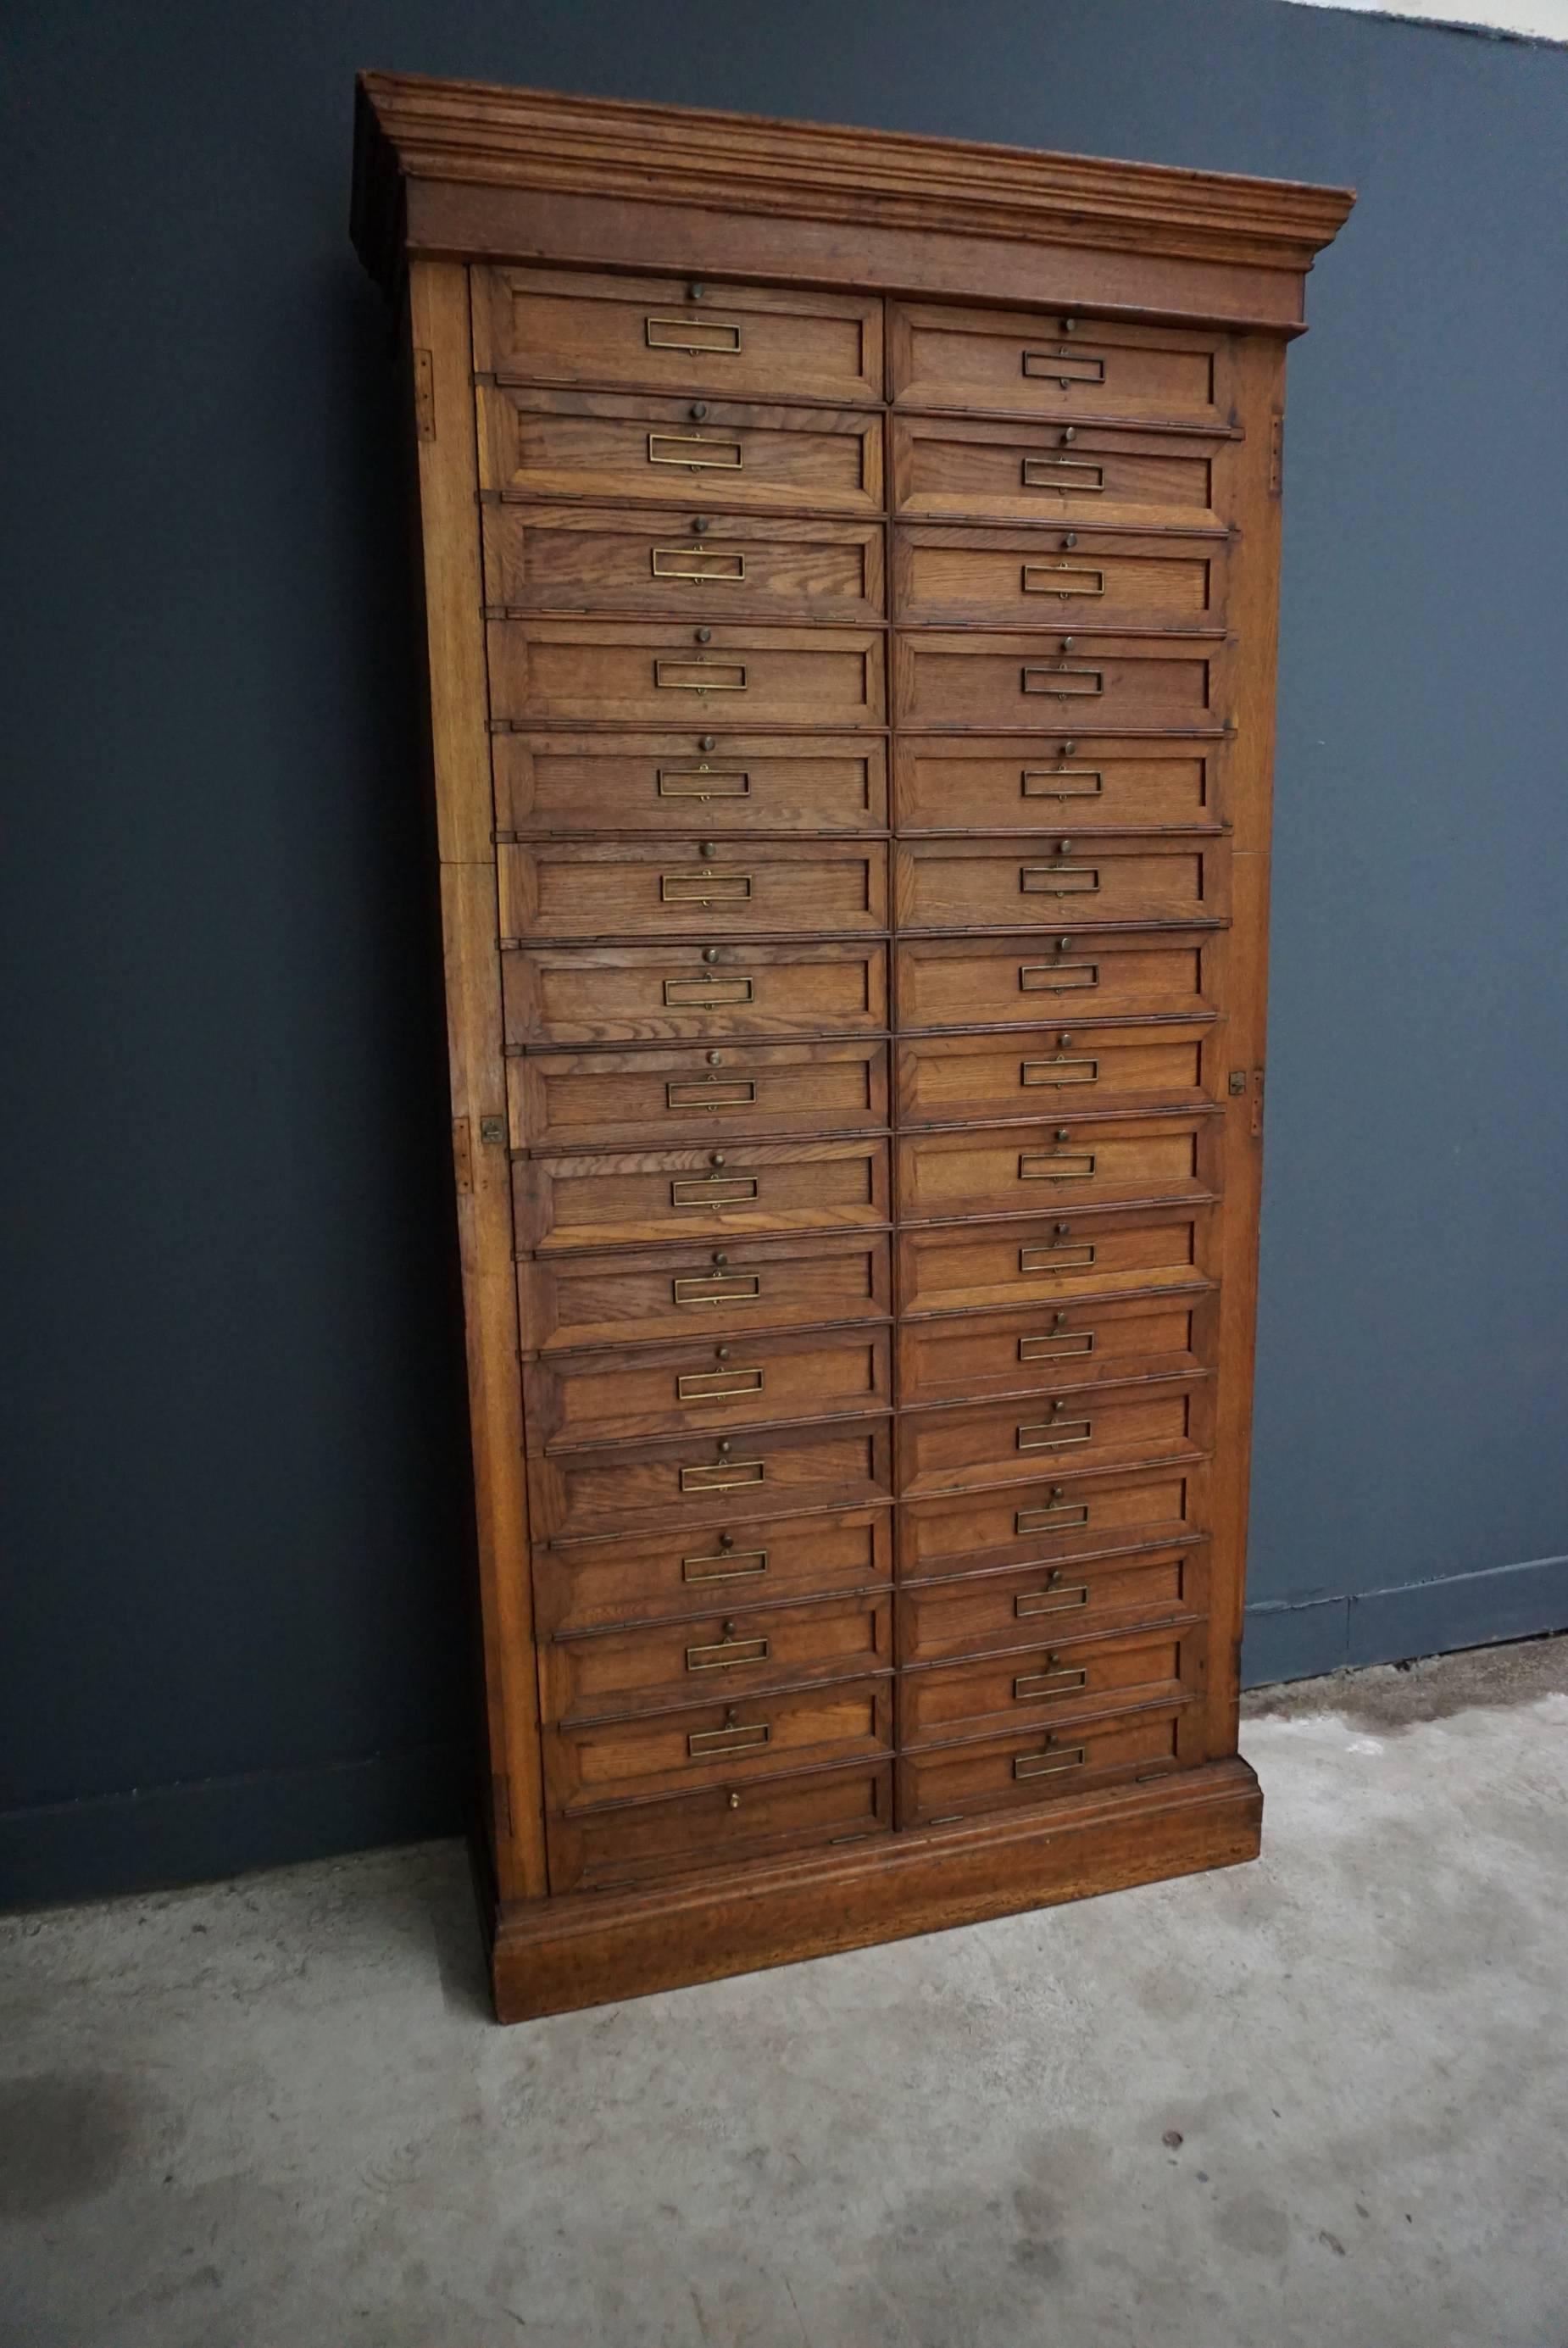 This French oak cabinet was designed and made, circa 1900 in France. It features 32 compartments with drop down doors that were used to store files. It was previously owned and used by the bank of France.